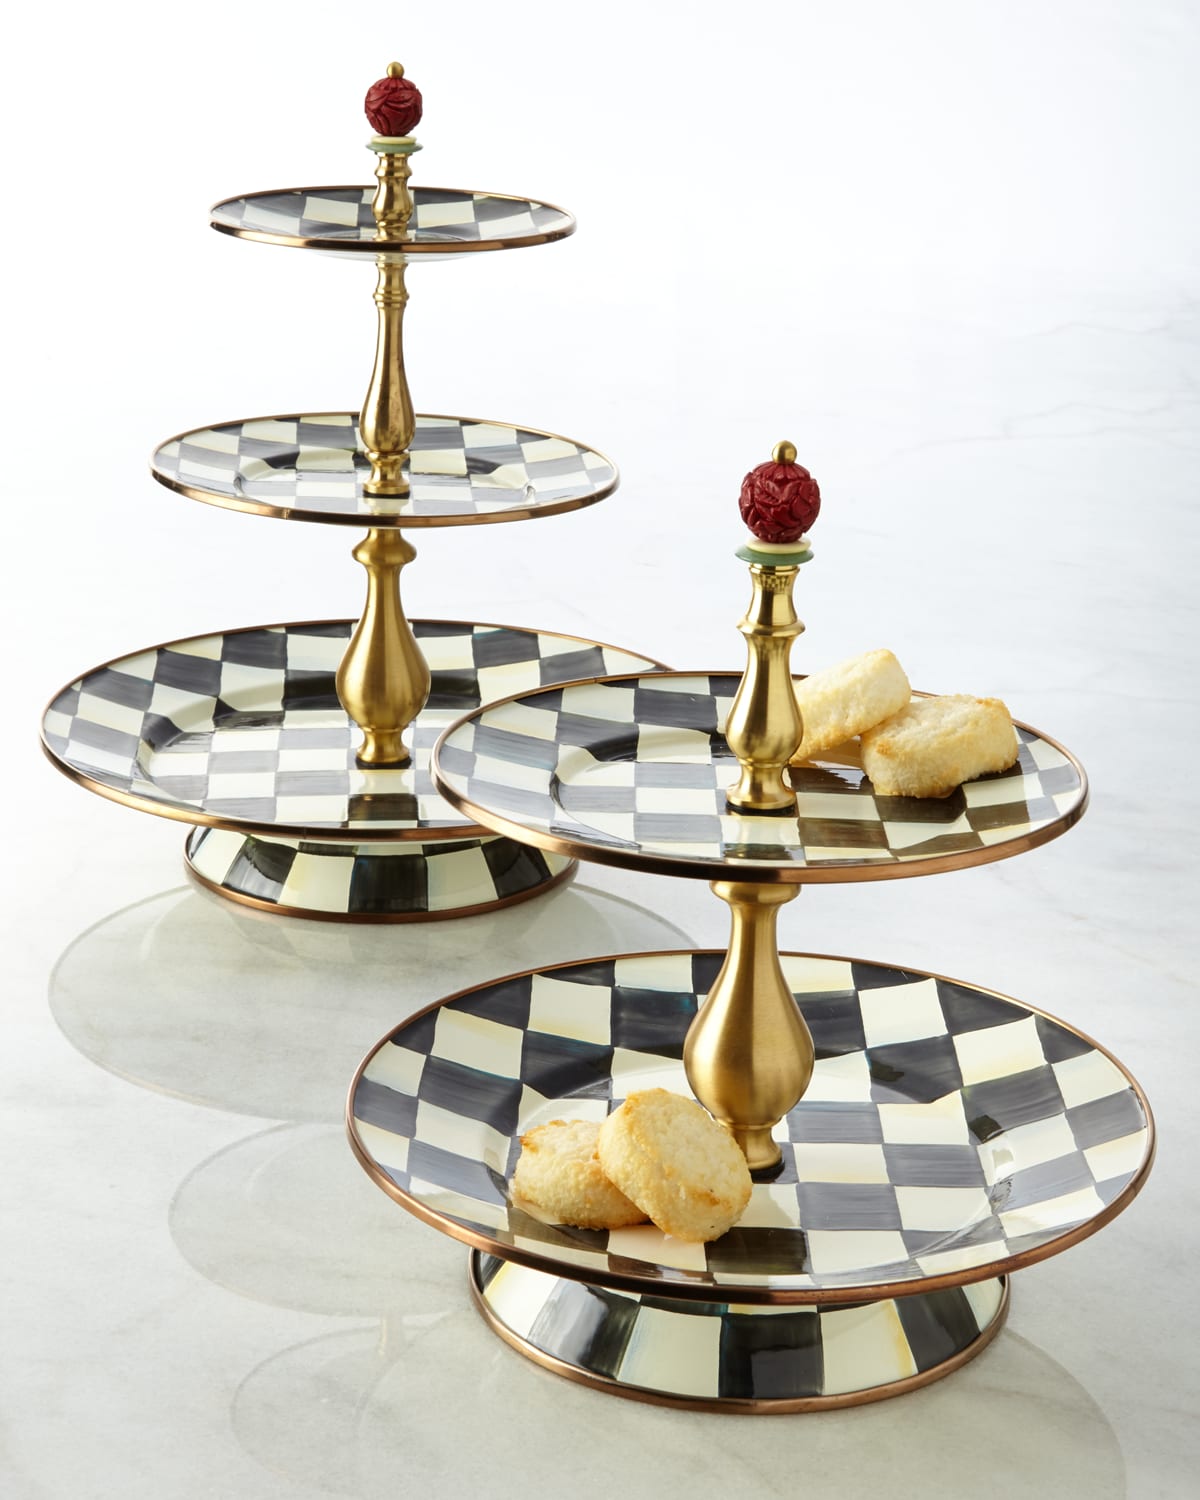 MACKENZIE-CHILDS COURTLY CHECK TWO-TIER SWEET STAND